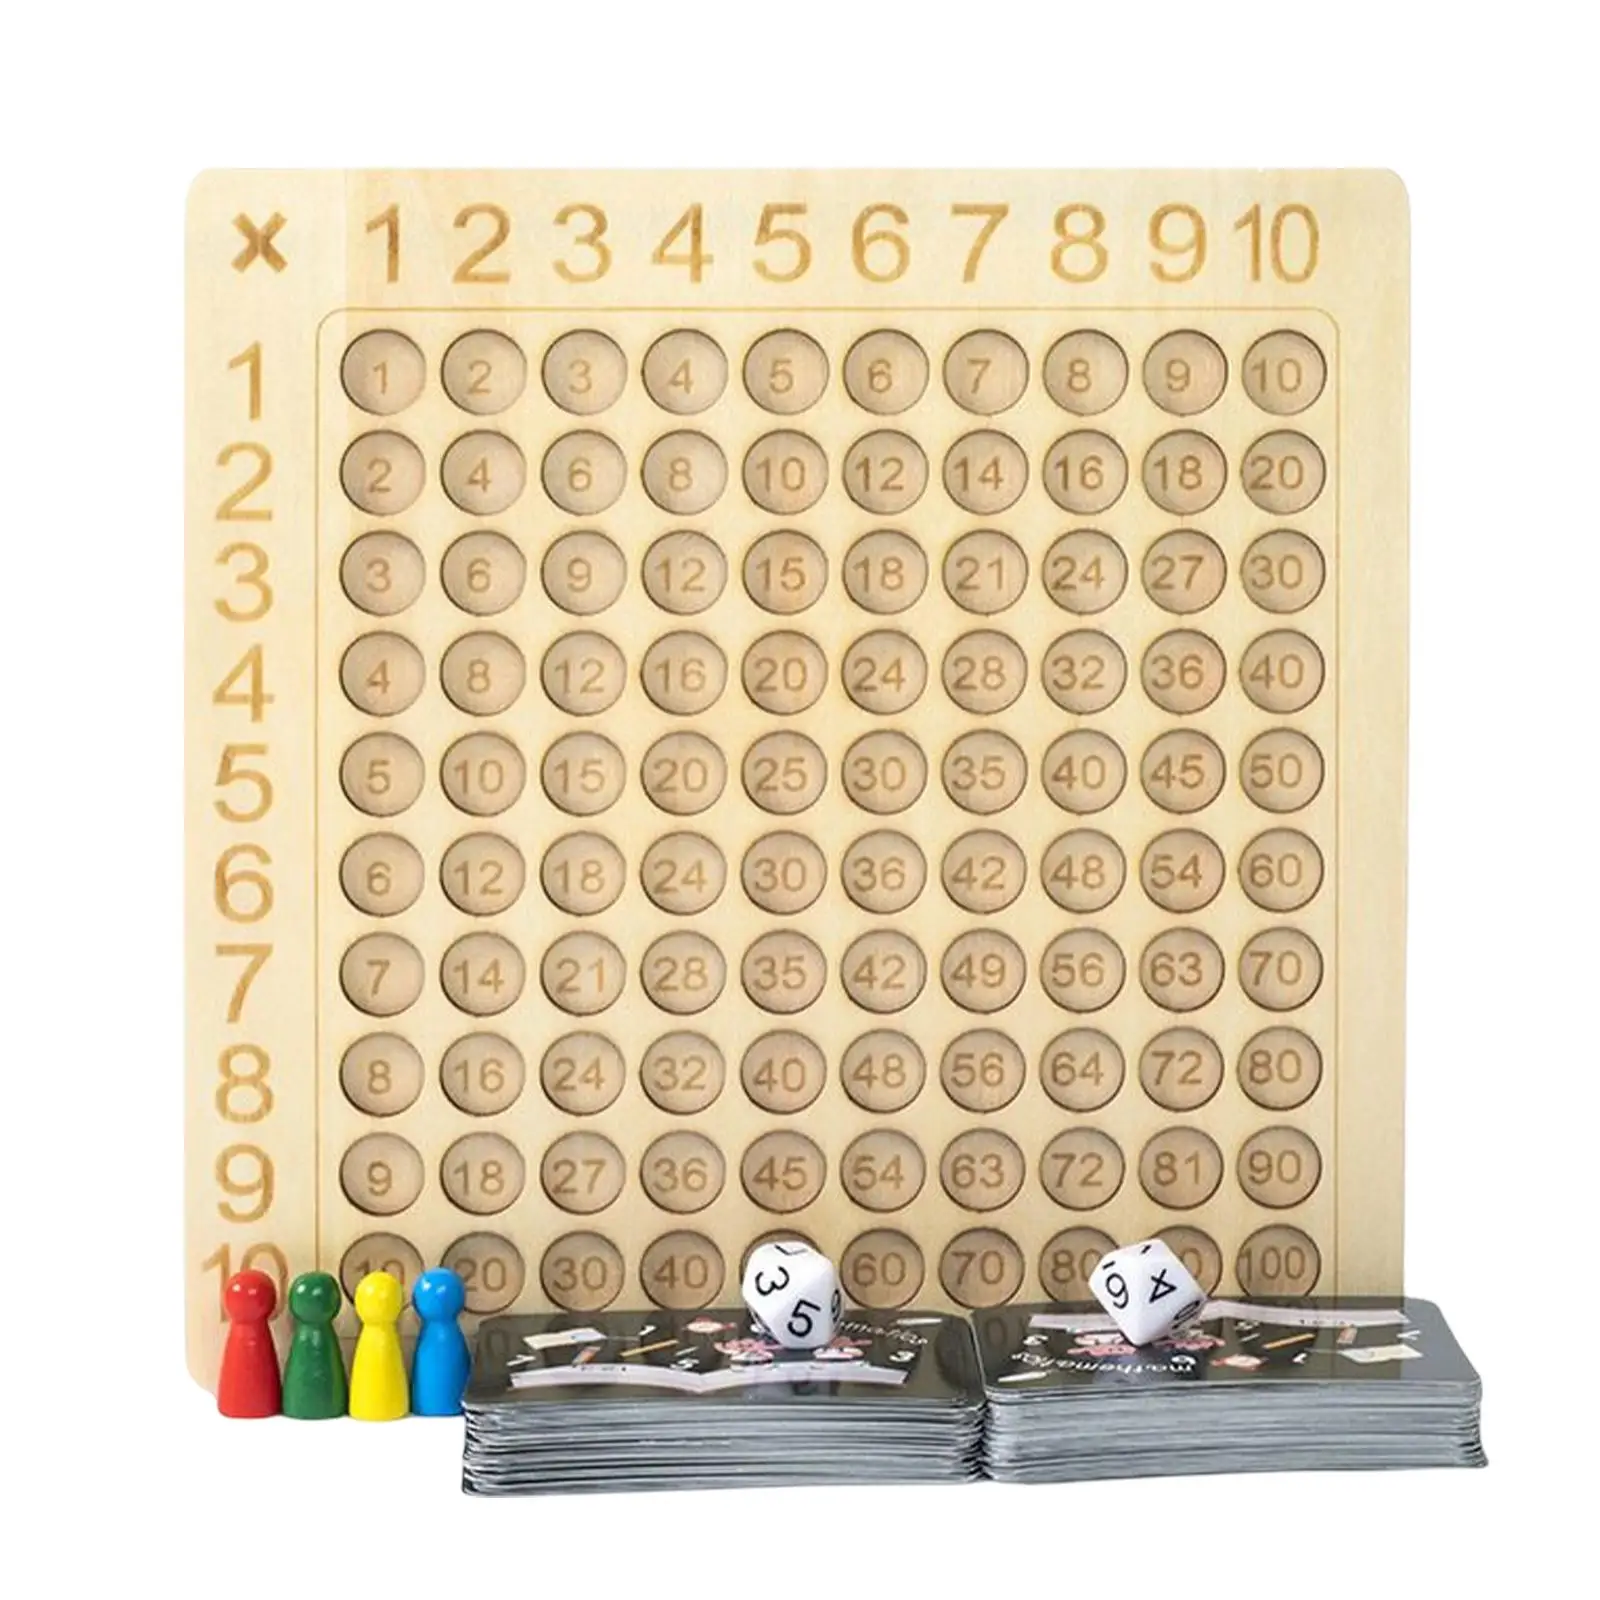 Wooden 99 Multiplication Table Math Board Game Arithmetic Teaching Aids Preschool Puzzle for Girls Boys Children Toddler